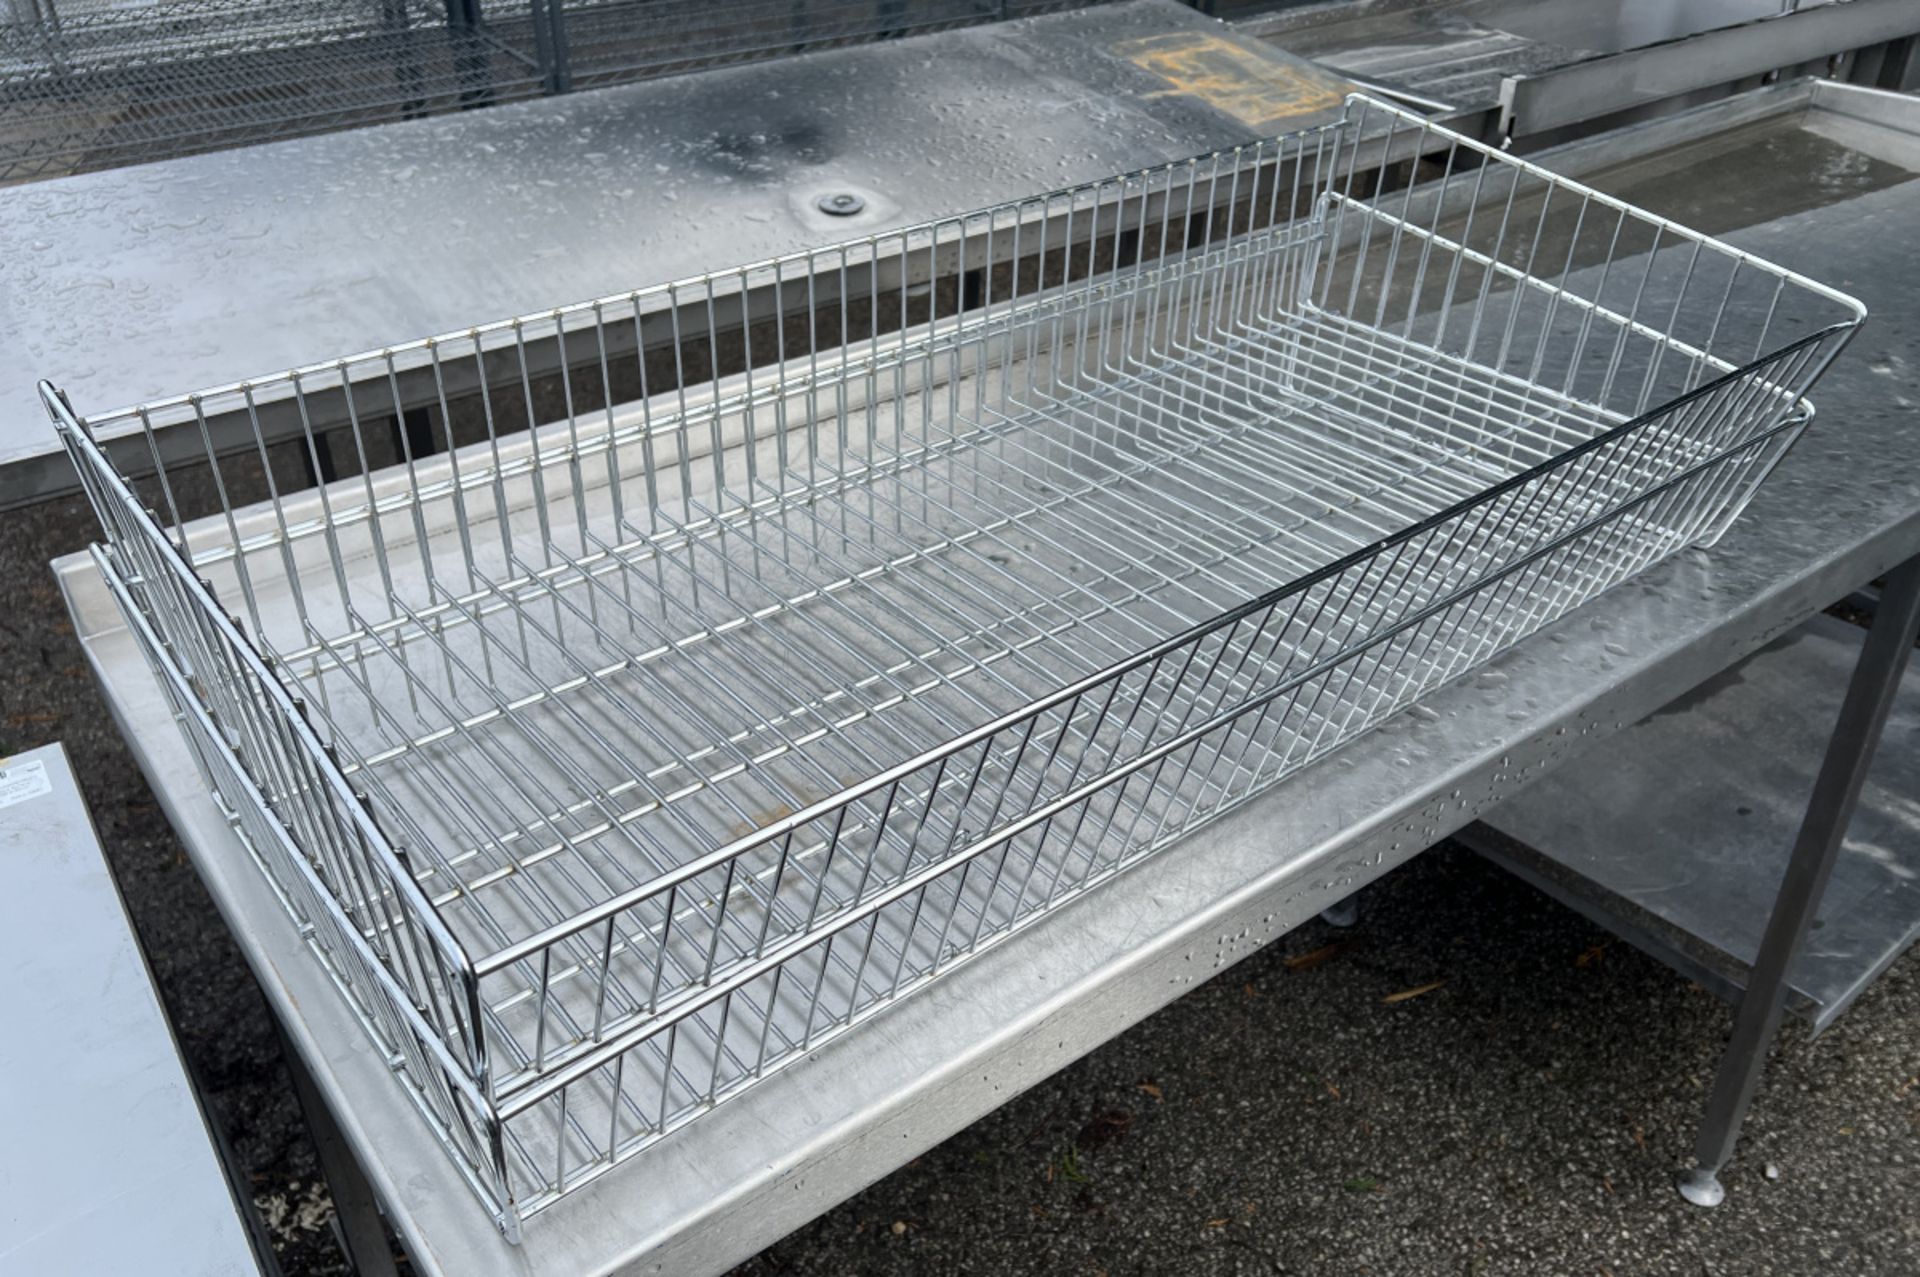 Gi Gant adjustable-height table or work surface - 200 x 60 x 75-85cm, 2x wire baskets - Image 4 of 4